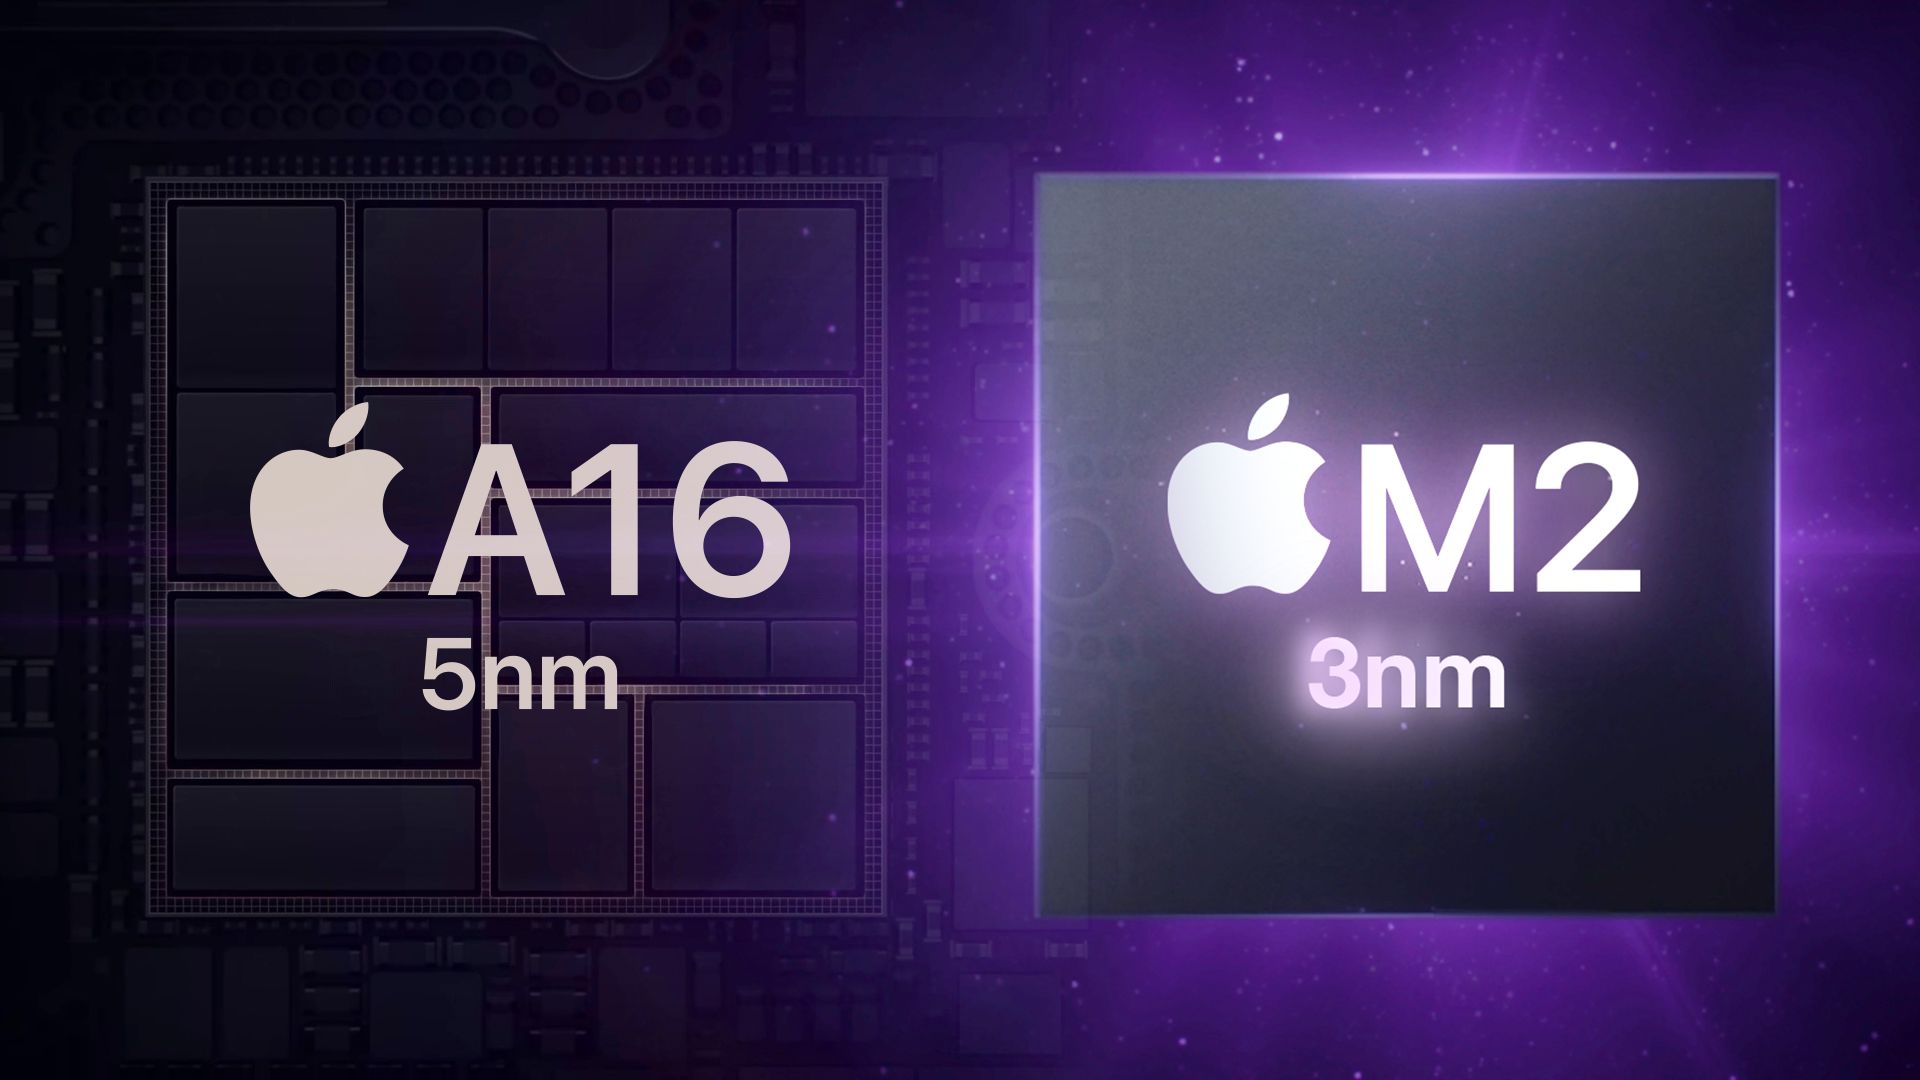 Alleged Apple chip plans suggest "A16" will stay at 5nm, "M2" to jump to 3nm instead

